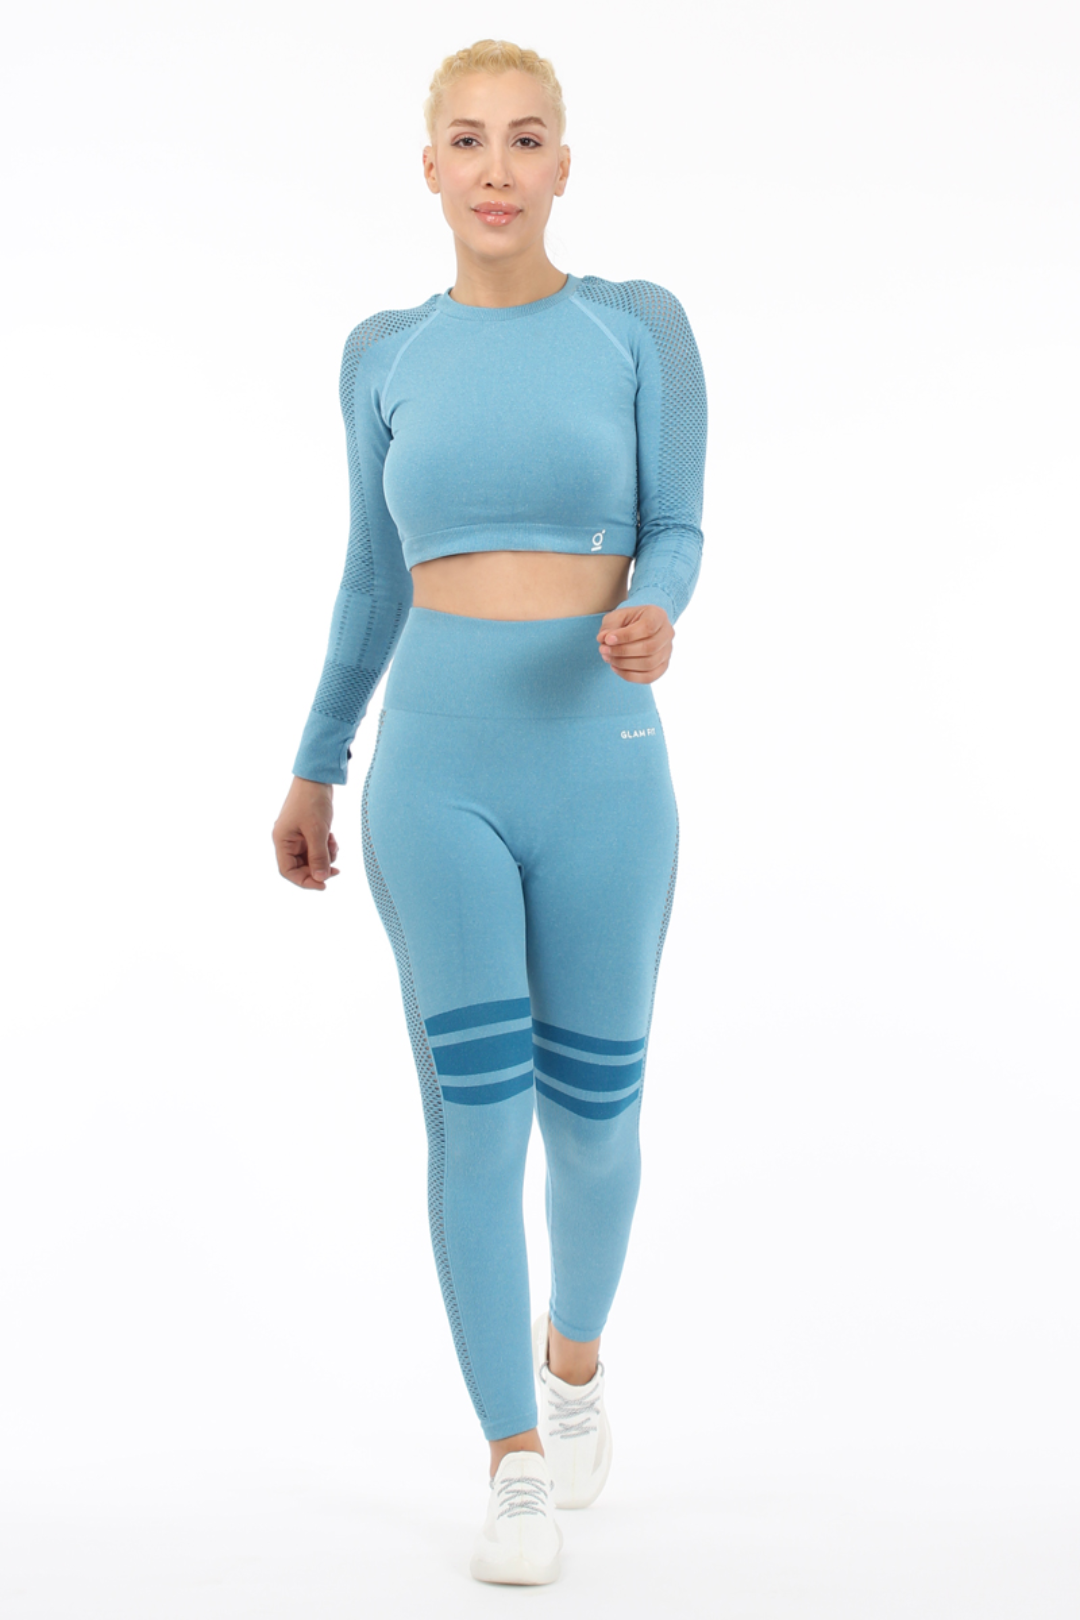 High Waist Compression Leggings-Royal blue – Bodied Clothing